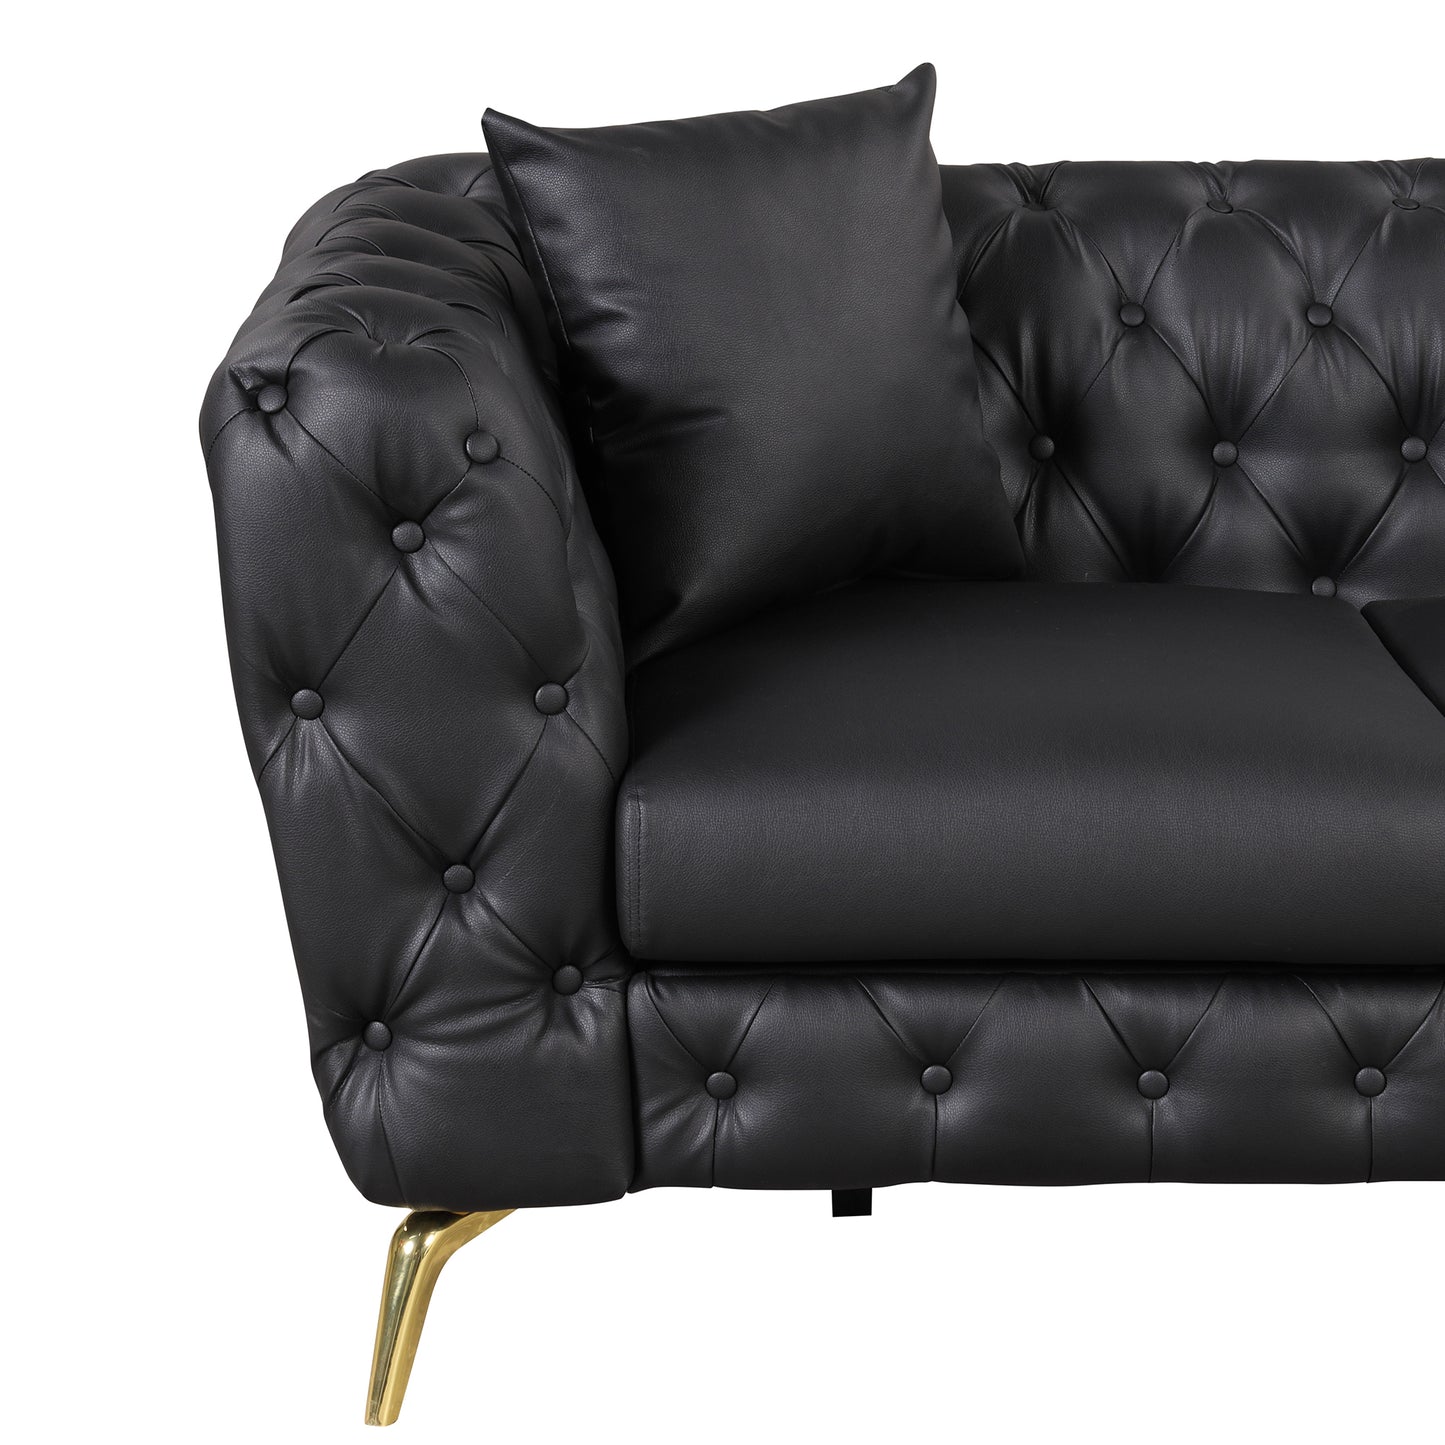 44" Modern Sofa Couch PU Upholstered Sofa with Sturdy Metal Legs, Button Tufted Back, Single Sofa Chair for Living Room, Apartment, Home Office, Black